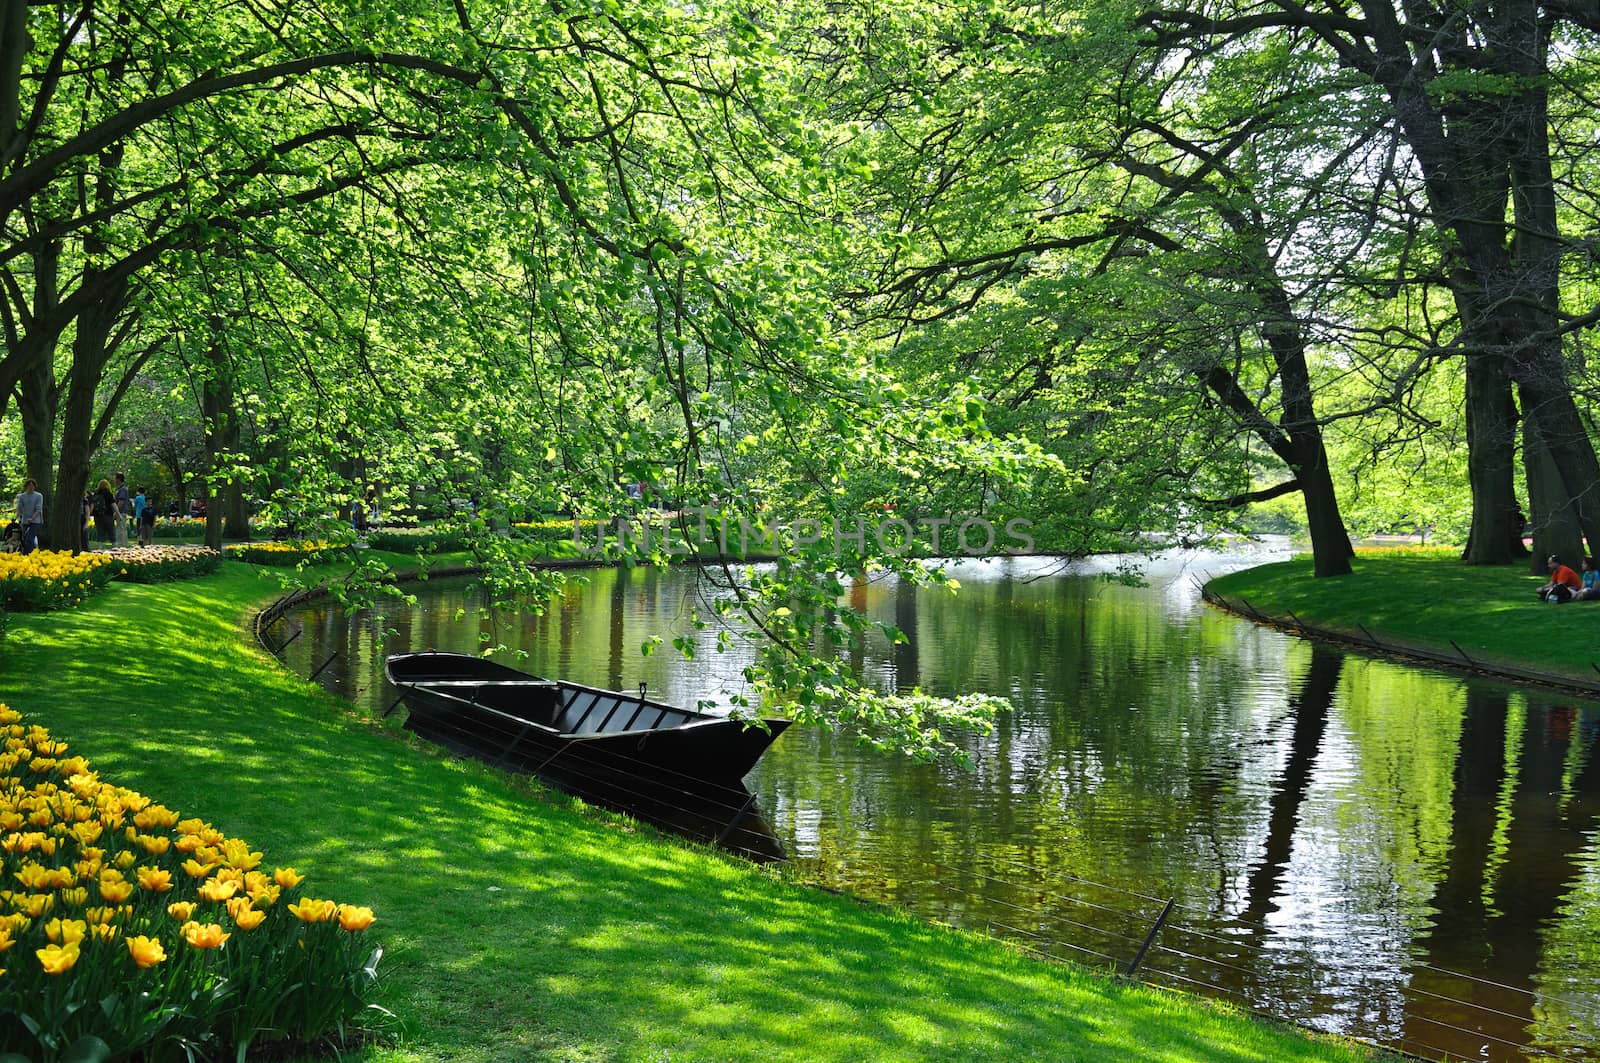 Boat near the river in Keukenhof park in Holland by Eagle2308